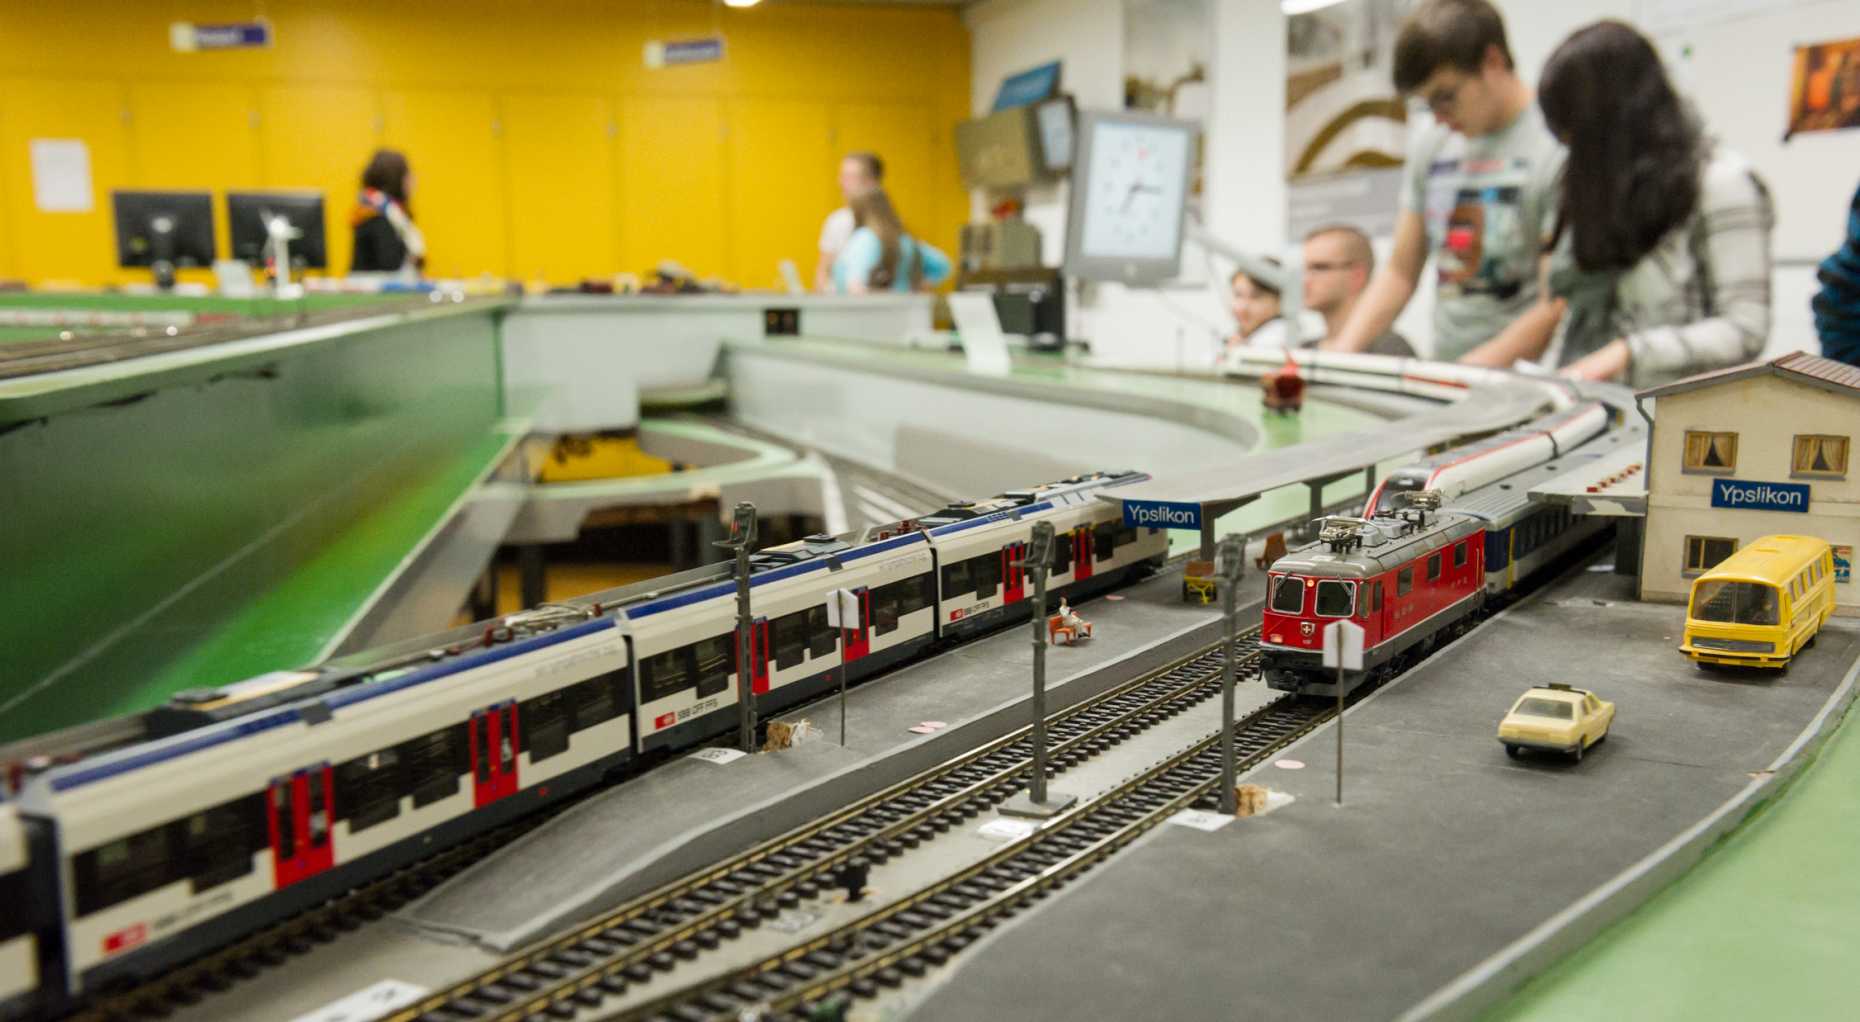 Enlarged view: Railway operations laboratory at ETH Zurich